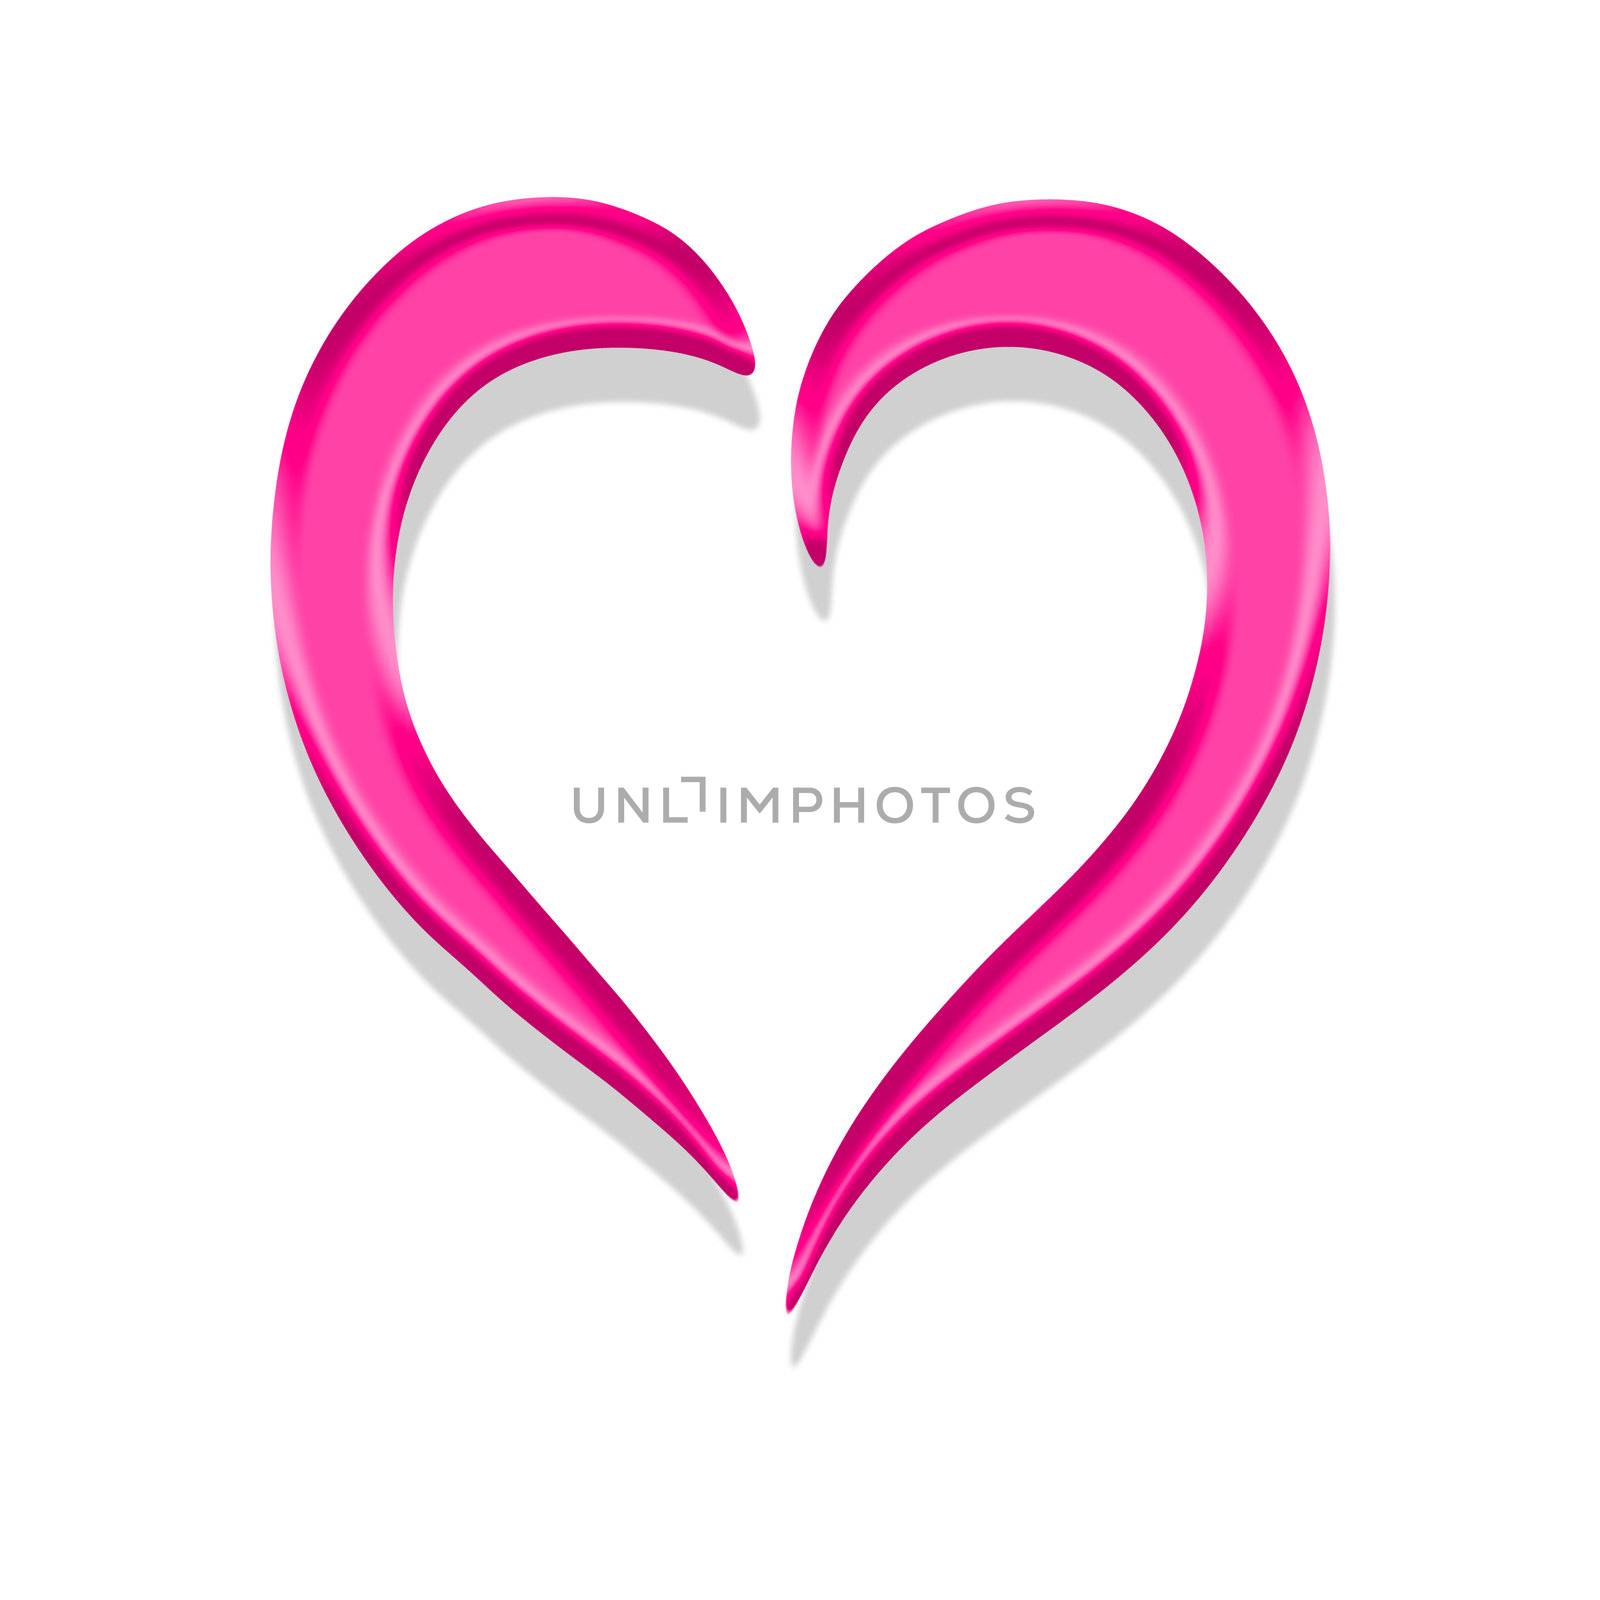 An image of a nice abstract pink heart